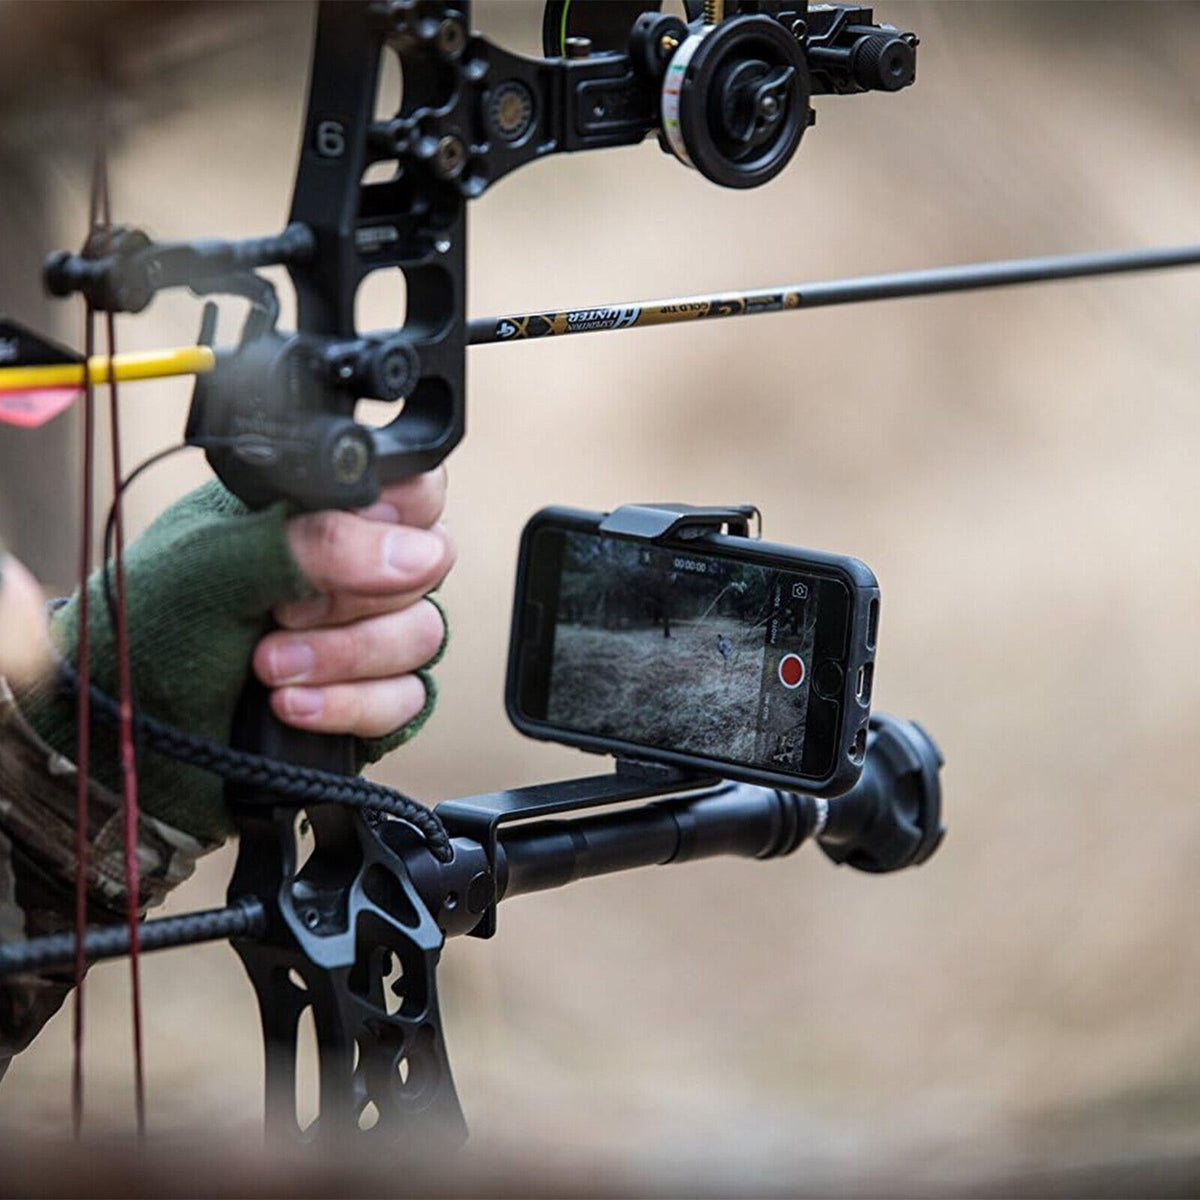 Bow-Mount Smartphone Holder for Archery Hunting